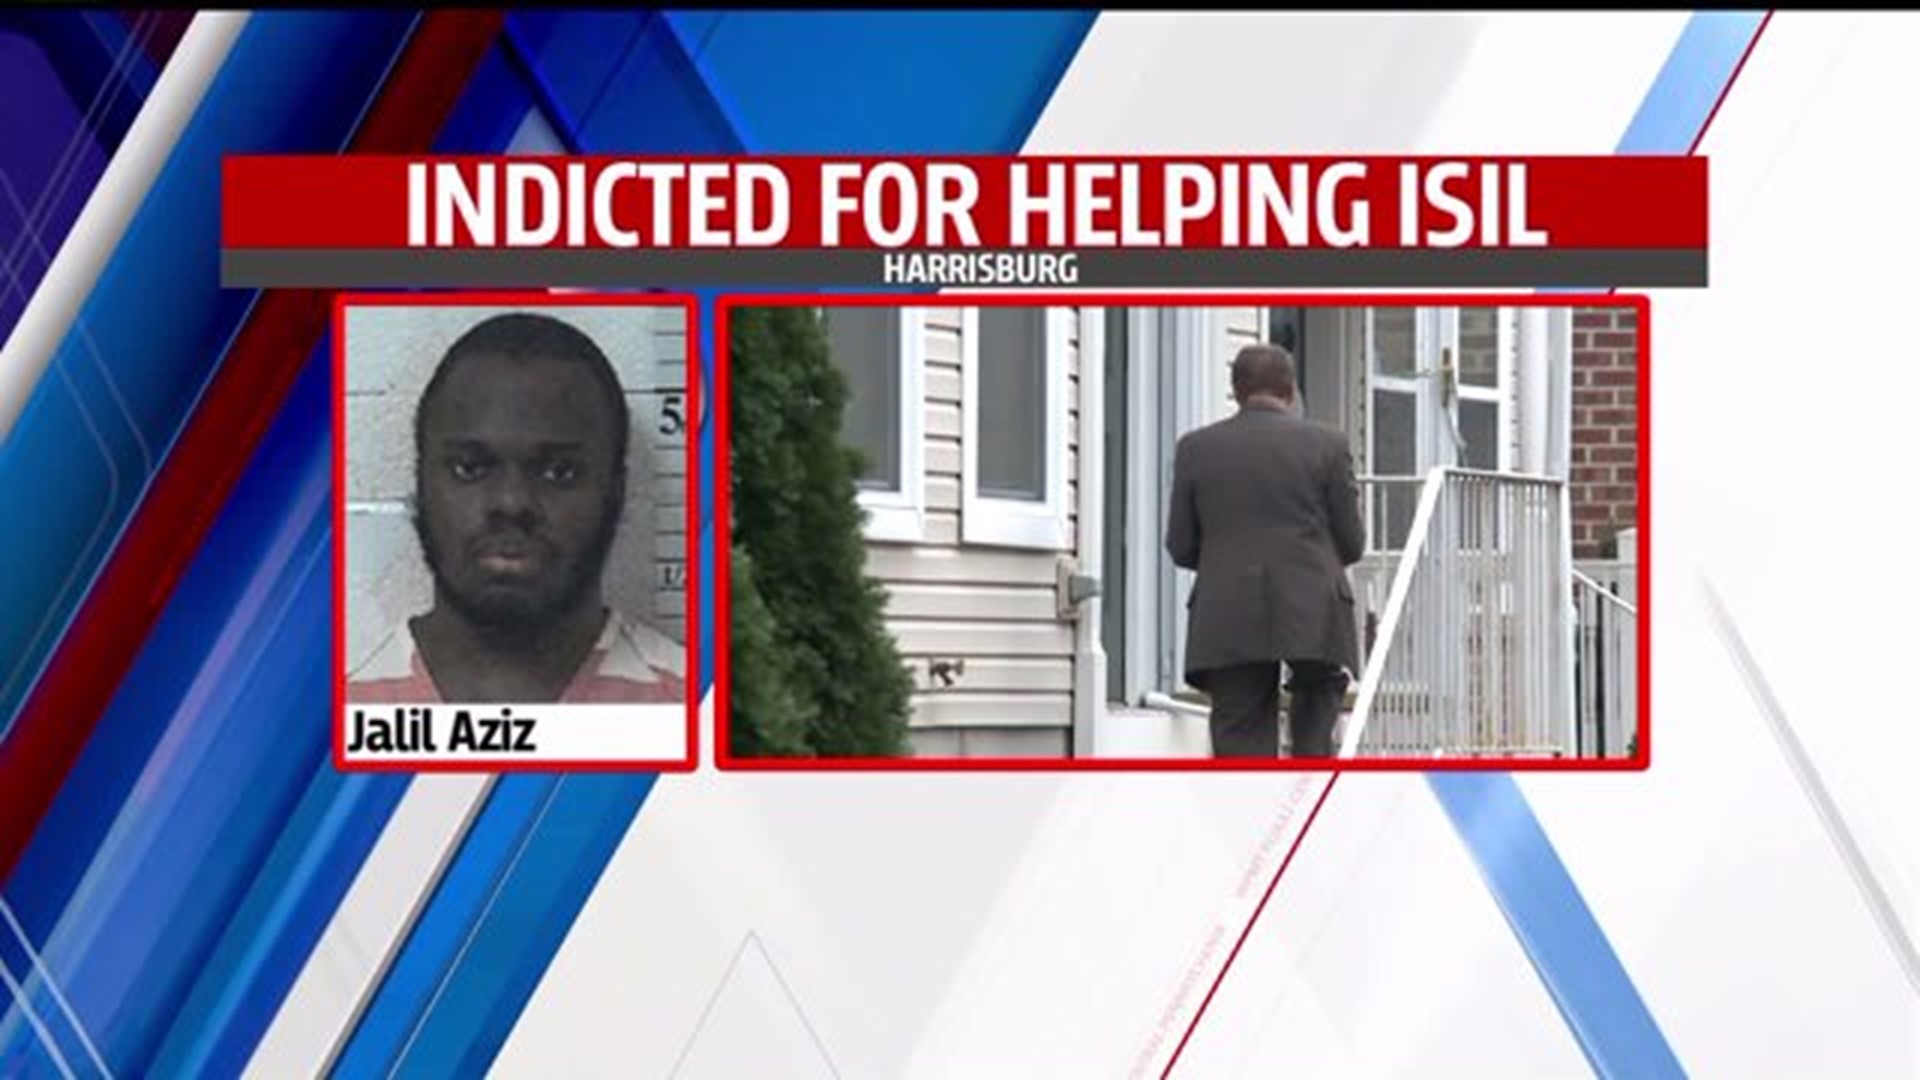 HARRISBURG ISIL SUSPECT PLEADS NOT GUILTY